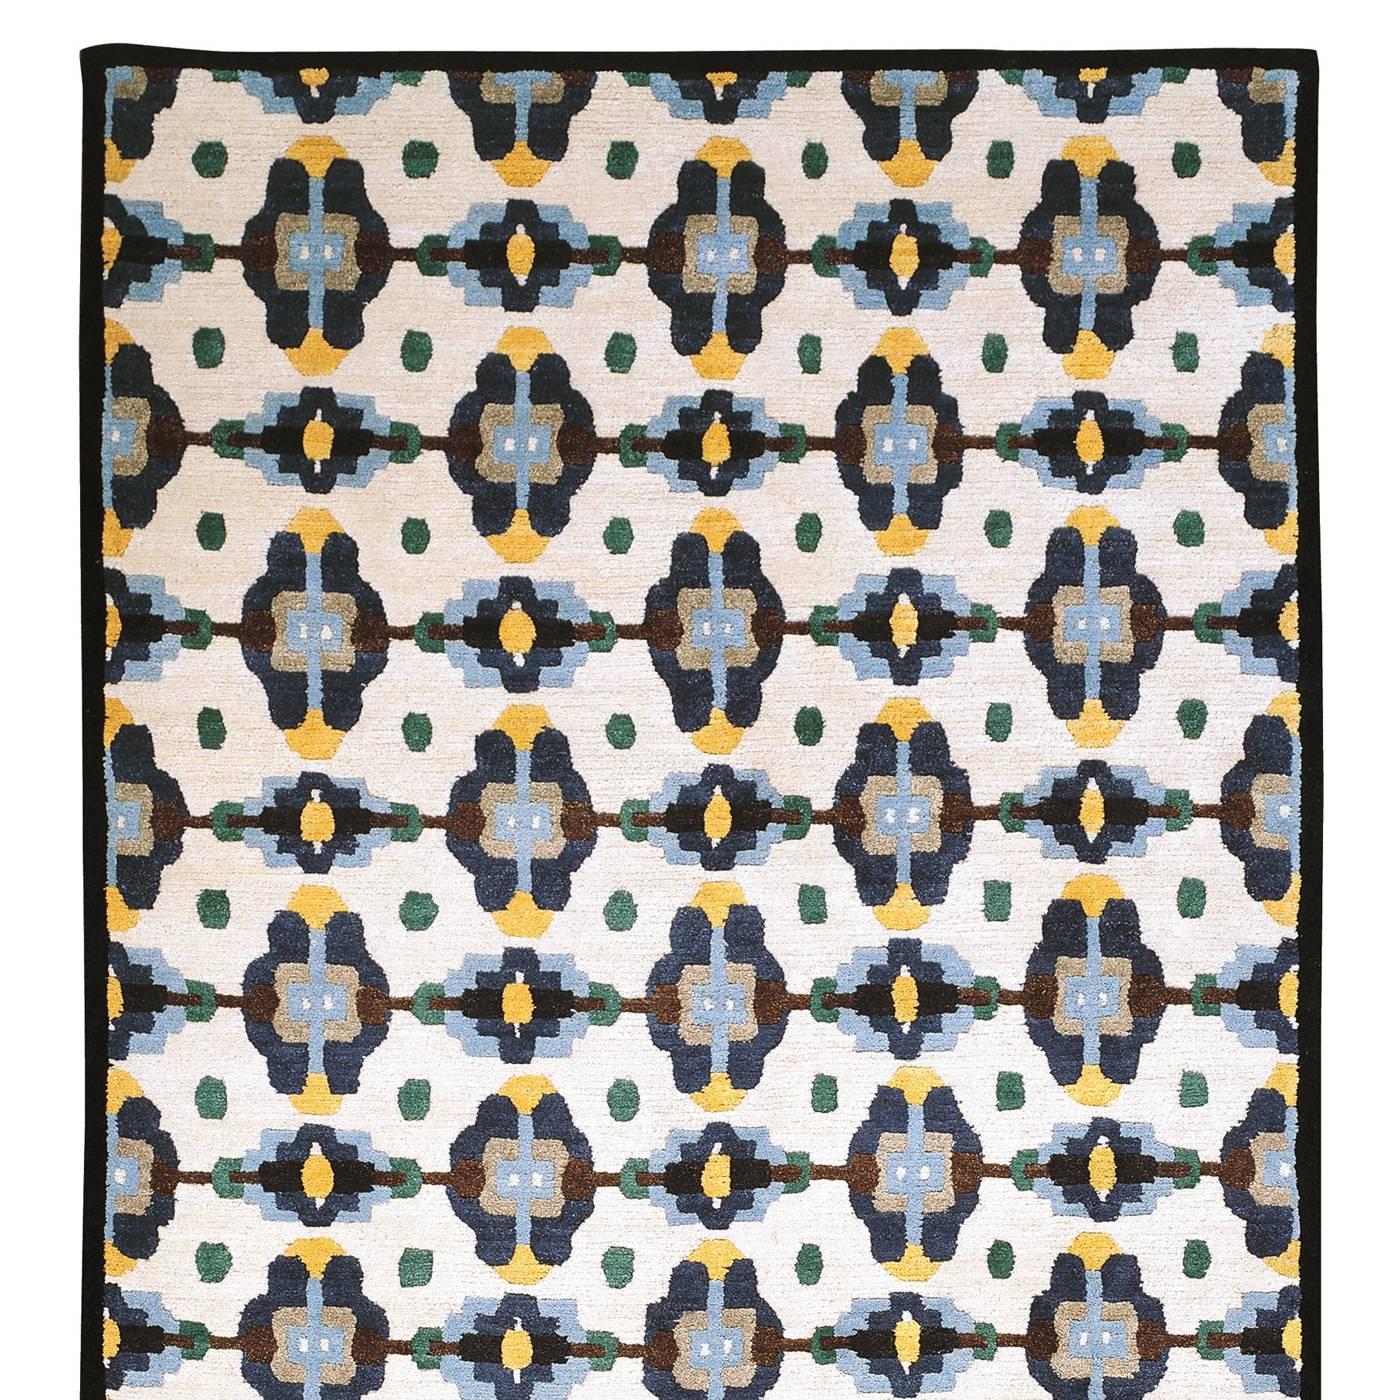 This elegant wool carpet is part of a 36-piece limited series designed by George J. Sowden, who also signed each piece. Because it was entirely handmade (from the harvesting of the Tibetan wool to its knotting and the final steps of finishing), this